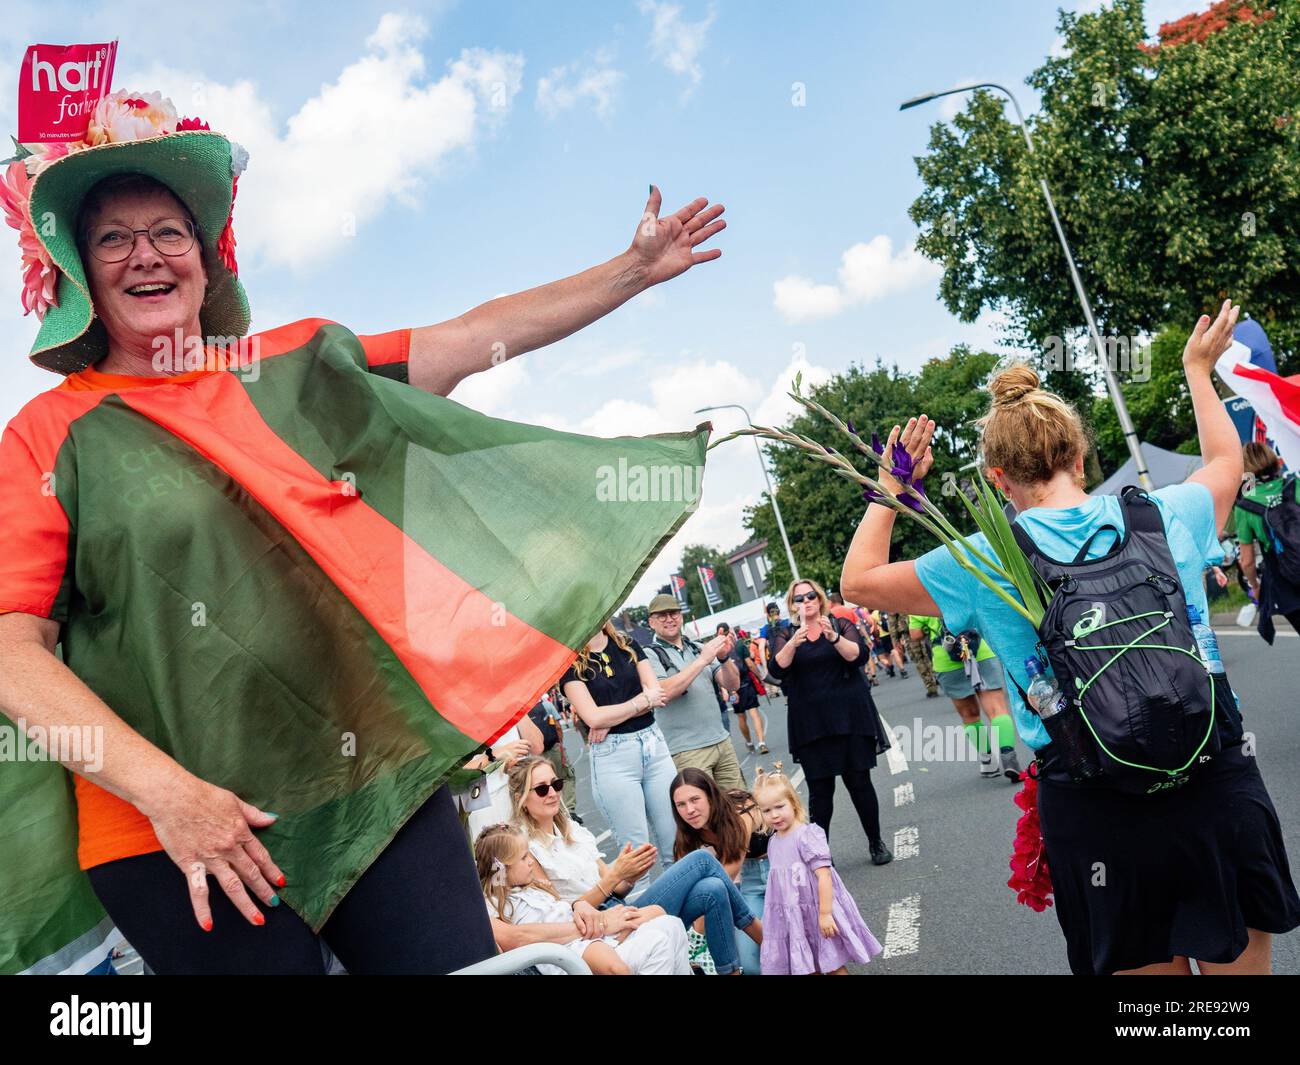 July 21, 2023, Nijmegen, Netherlands: A woman wearing the colors of this event is seen cheering the walkers. Since it is the world's biggest multi-day walking event, The International Four Days Marches (in Dutch 'De Vierdaagse') is seen as the prime example of sportsmanship and international bonding between military servicemen, women and civilians from many different countries. This year, it was the 105 edition and the official amount of walkers registered was 43,363 from 77 countries. Participants can choose to walk 30km, 40km, or 50km per day. On the last day, 39,019 walkers crossed the fi Stock Photo